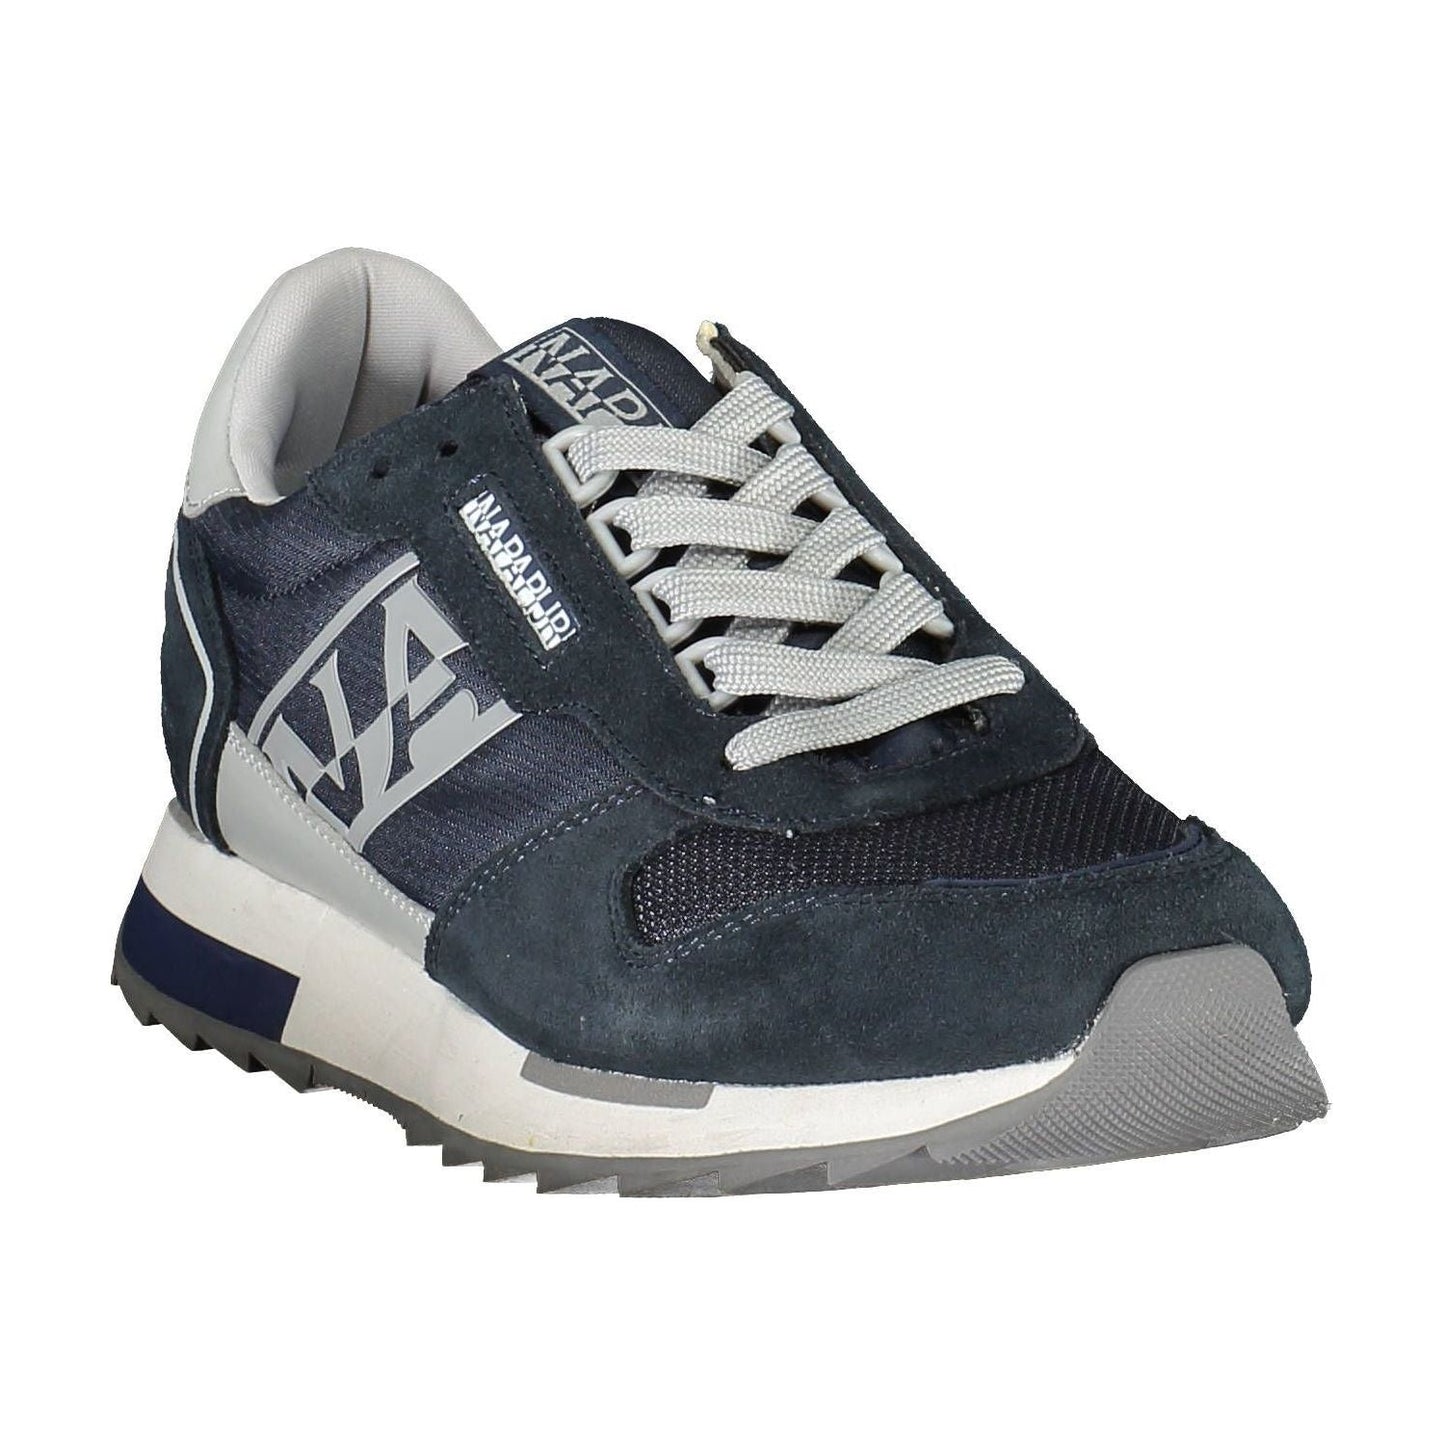 Napapijri Sporty Blue Lace-Up Sneakers with Logo Detail sporty-blue-lace-up-sneakers-with-logo-detail